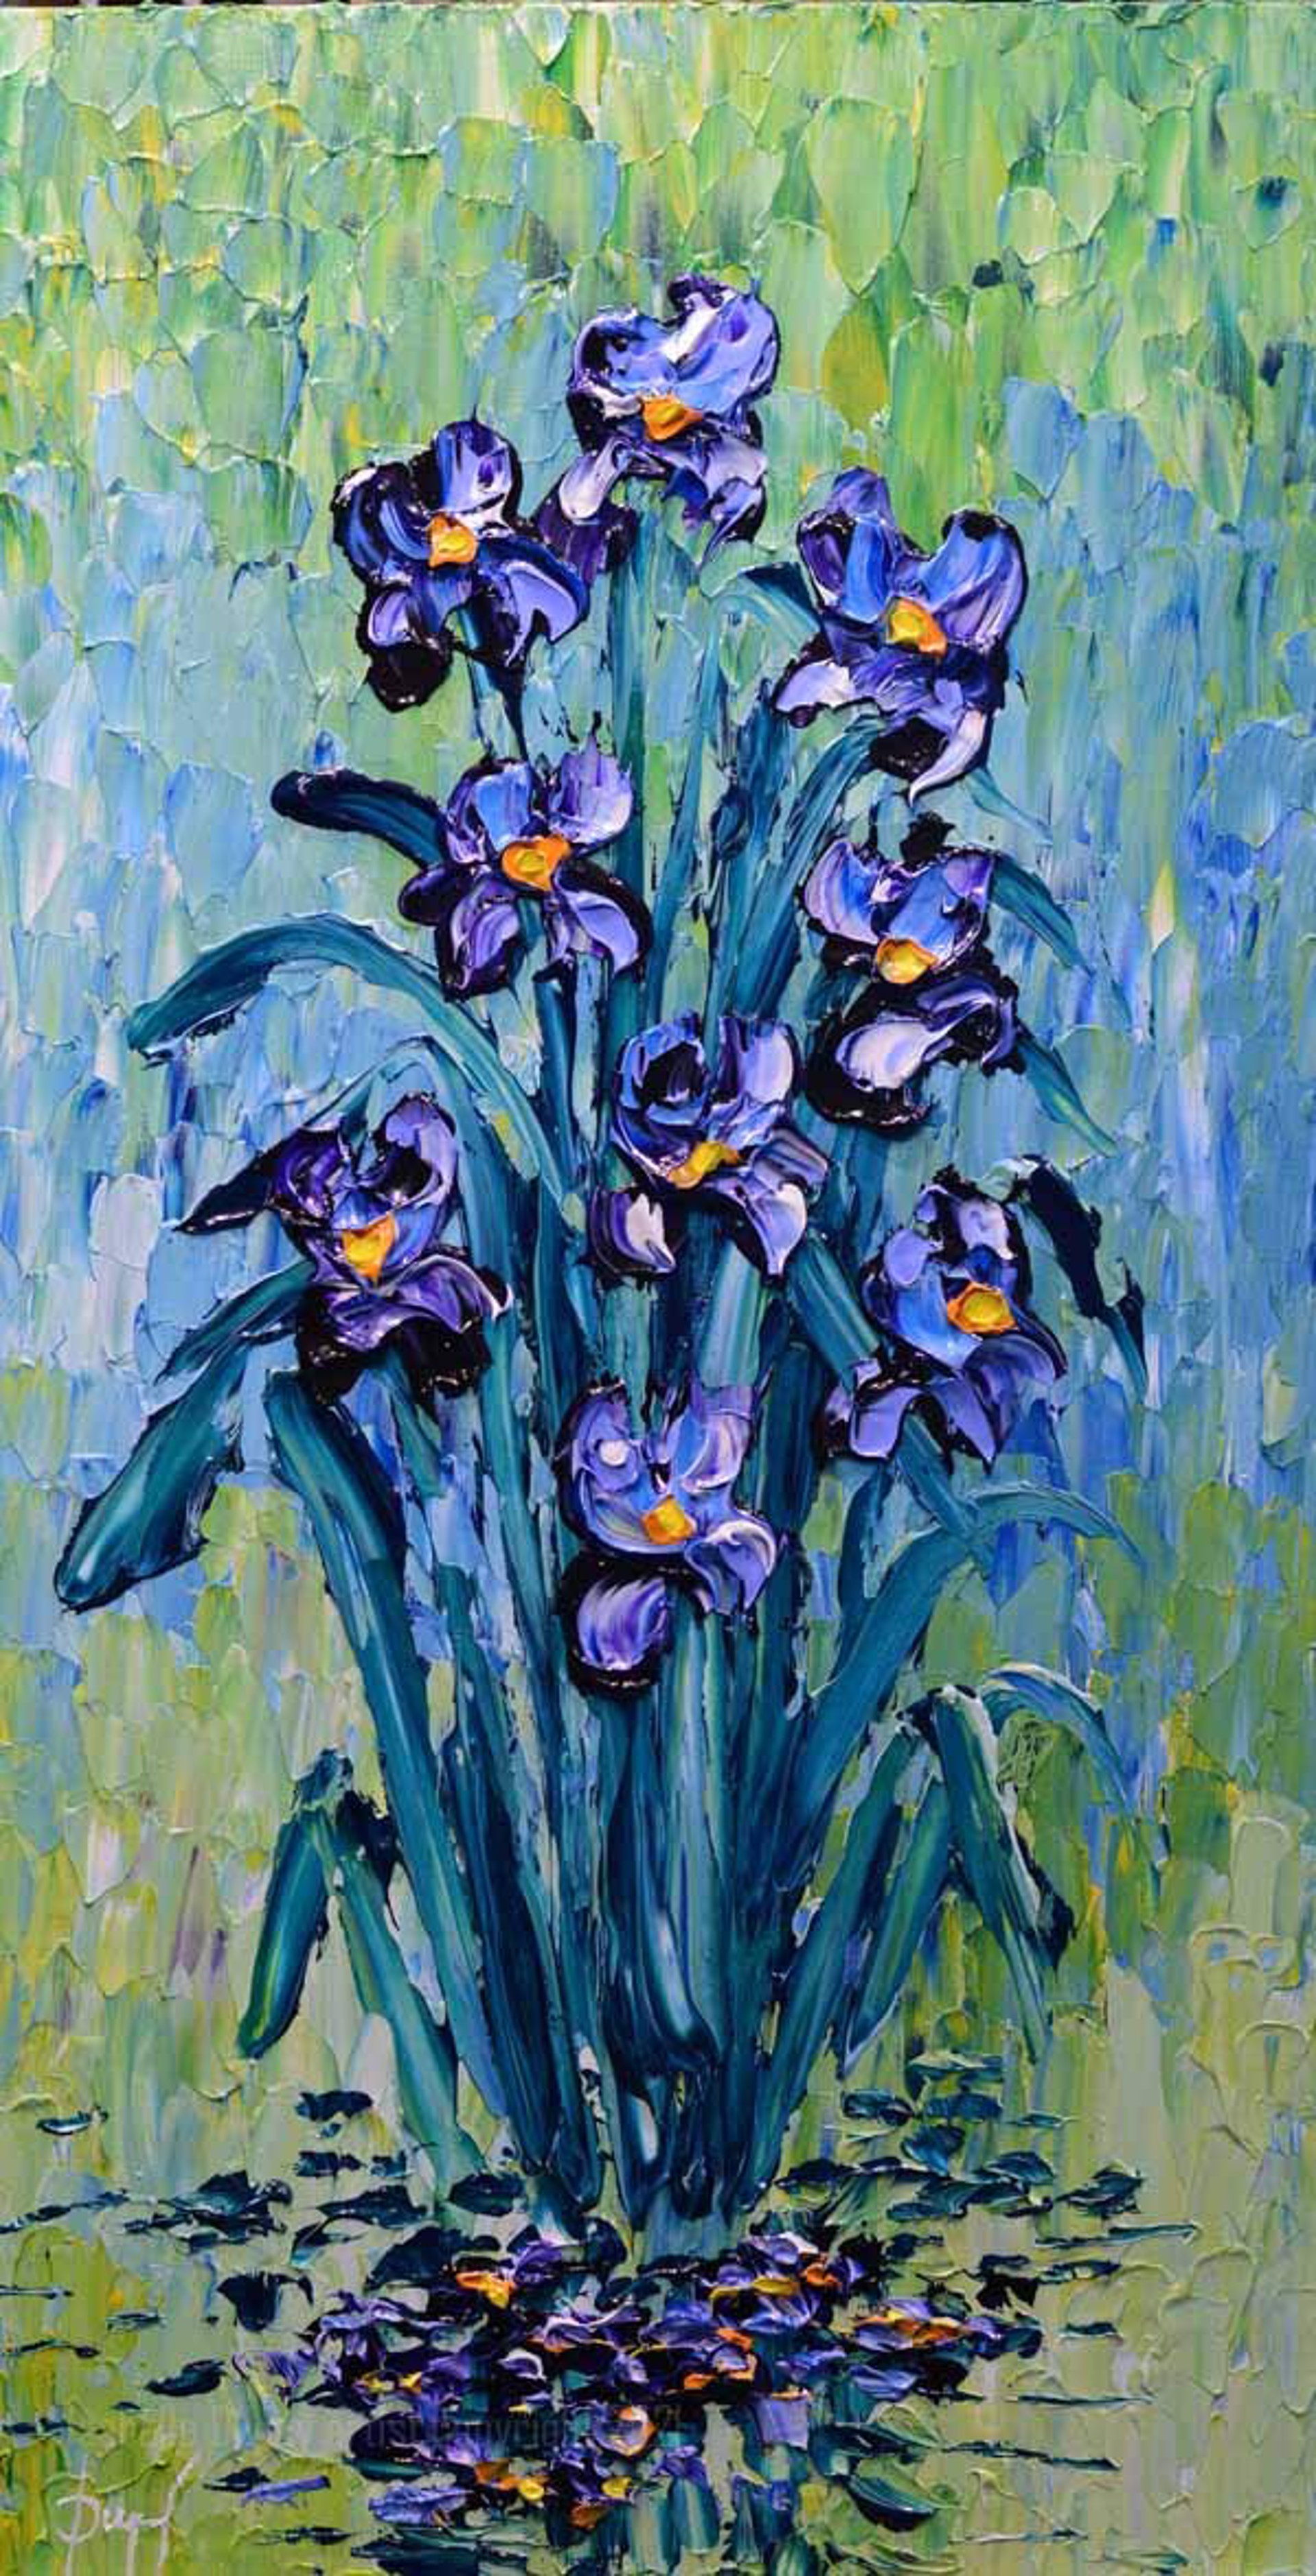 Blue Irises of Reflection by Isabelle Dupuy